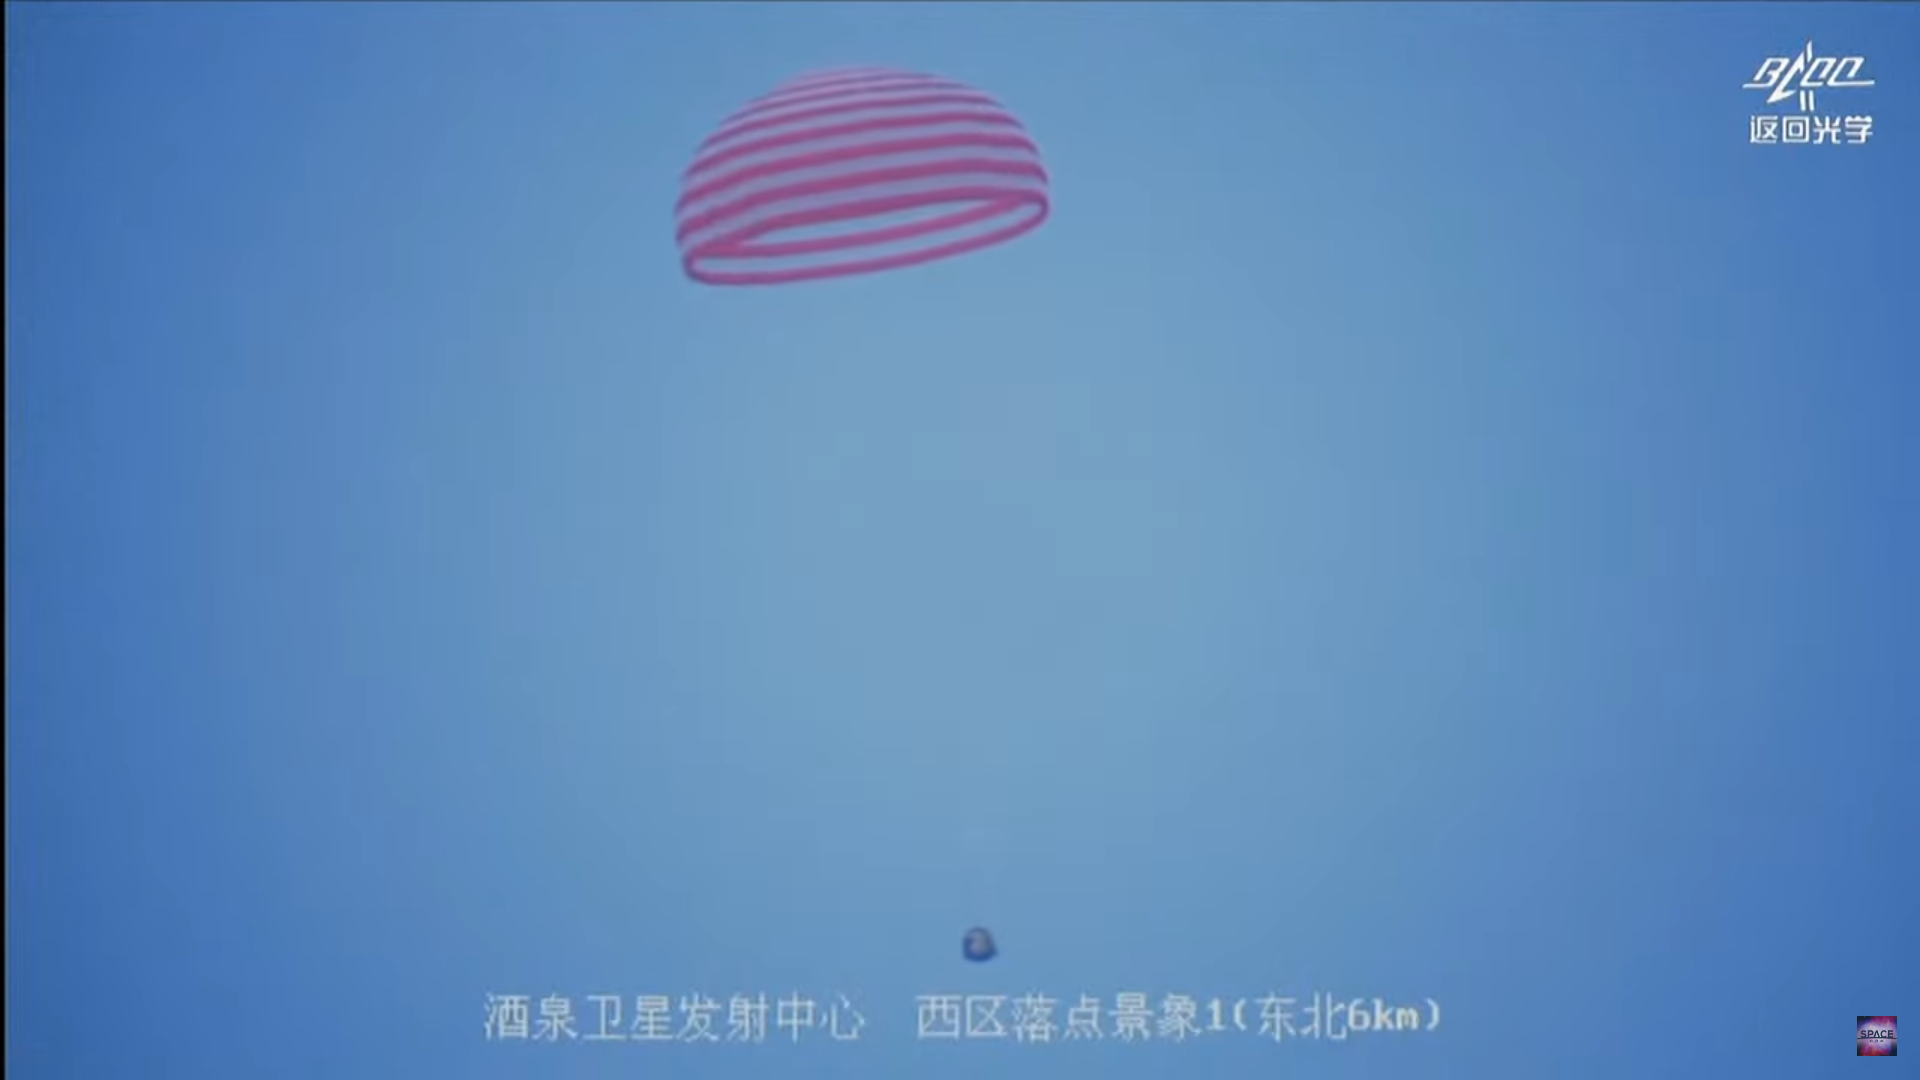 A Chinese space capsule hanging from a parachute as it floats with a blue sky behind.